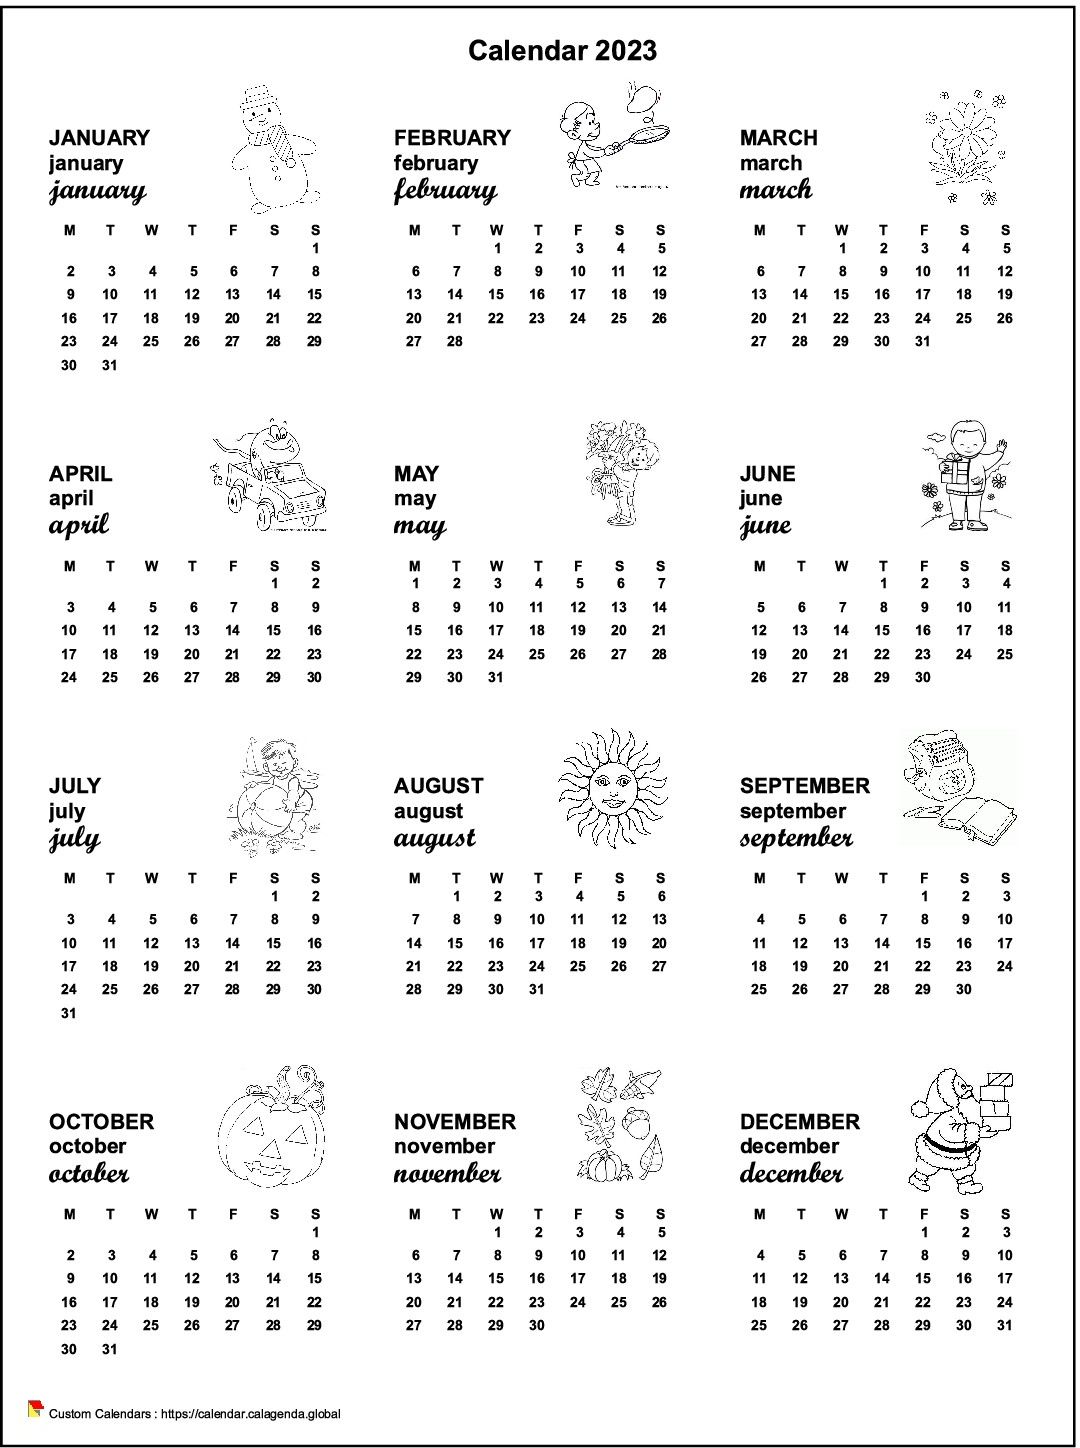 Calendar 2032 annual maternal and primary school